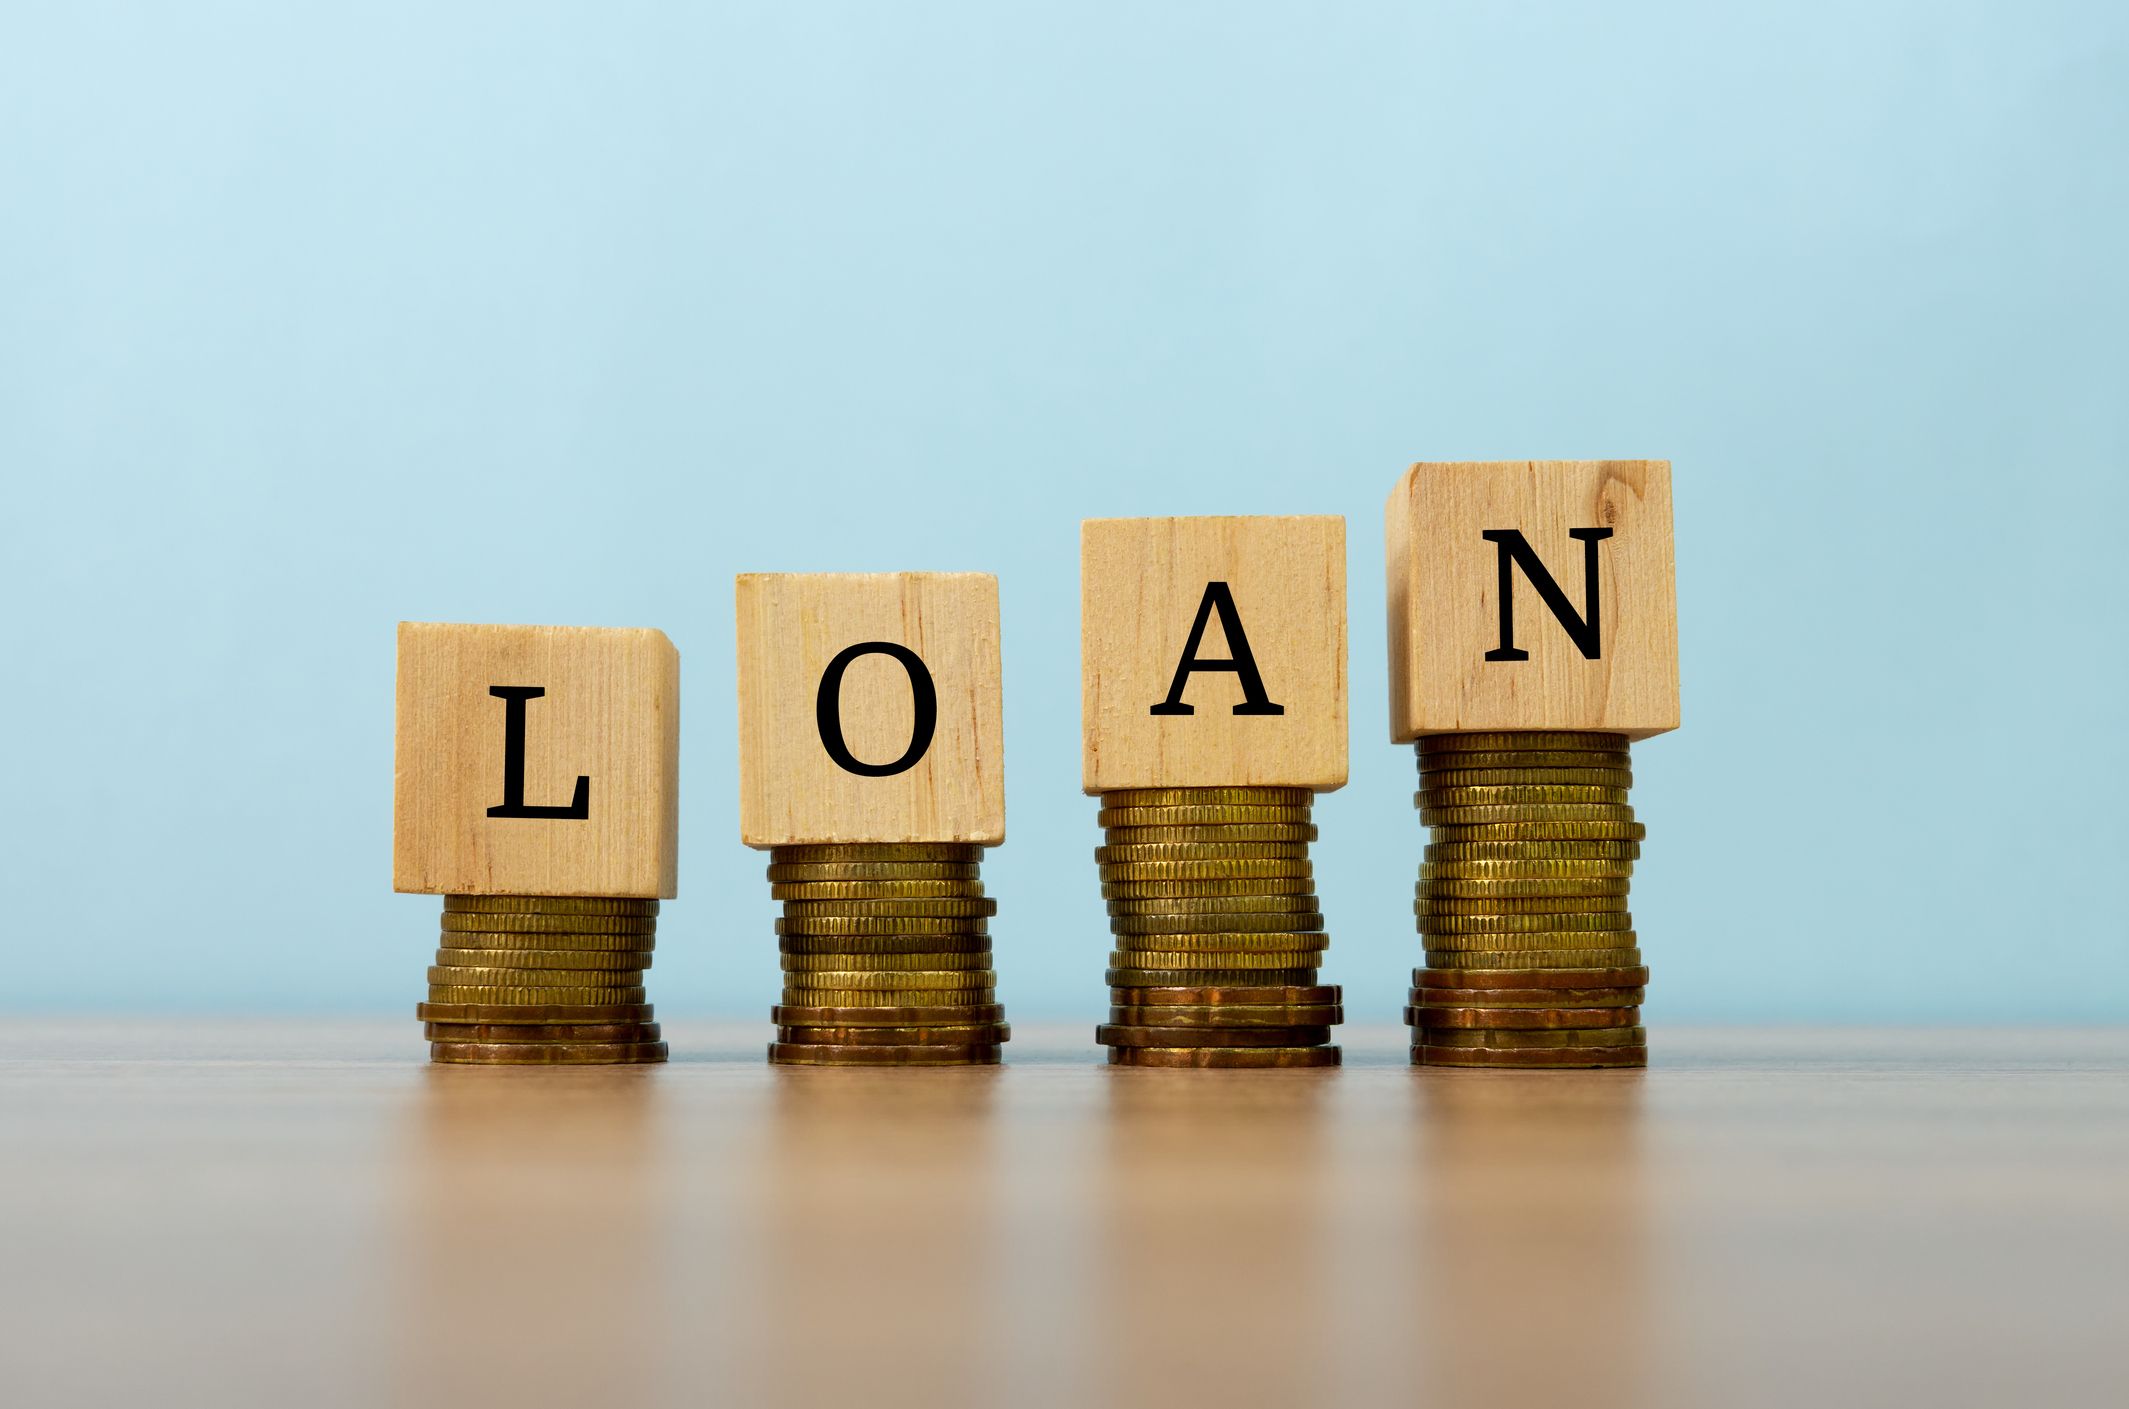 How To Get A Personal Loan - Requirements For a Personal Loan